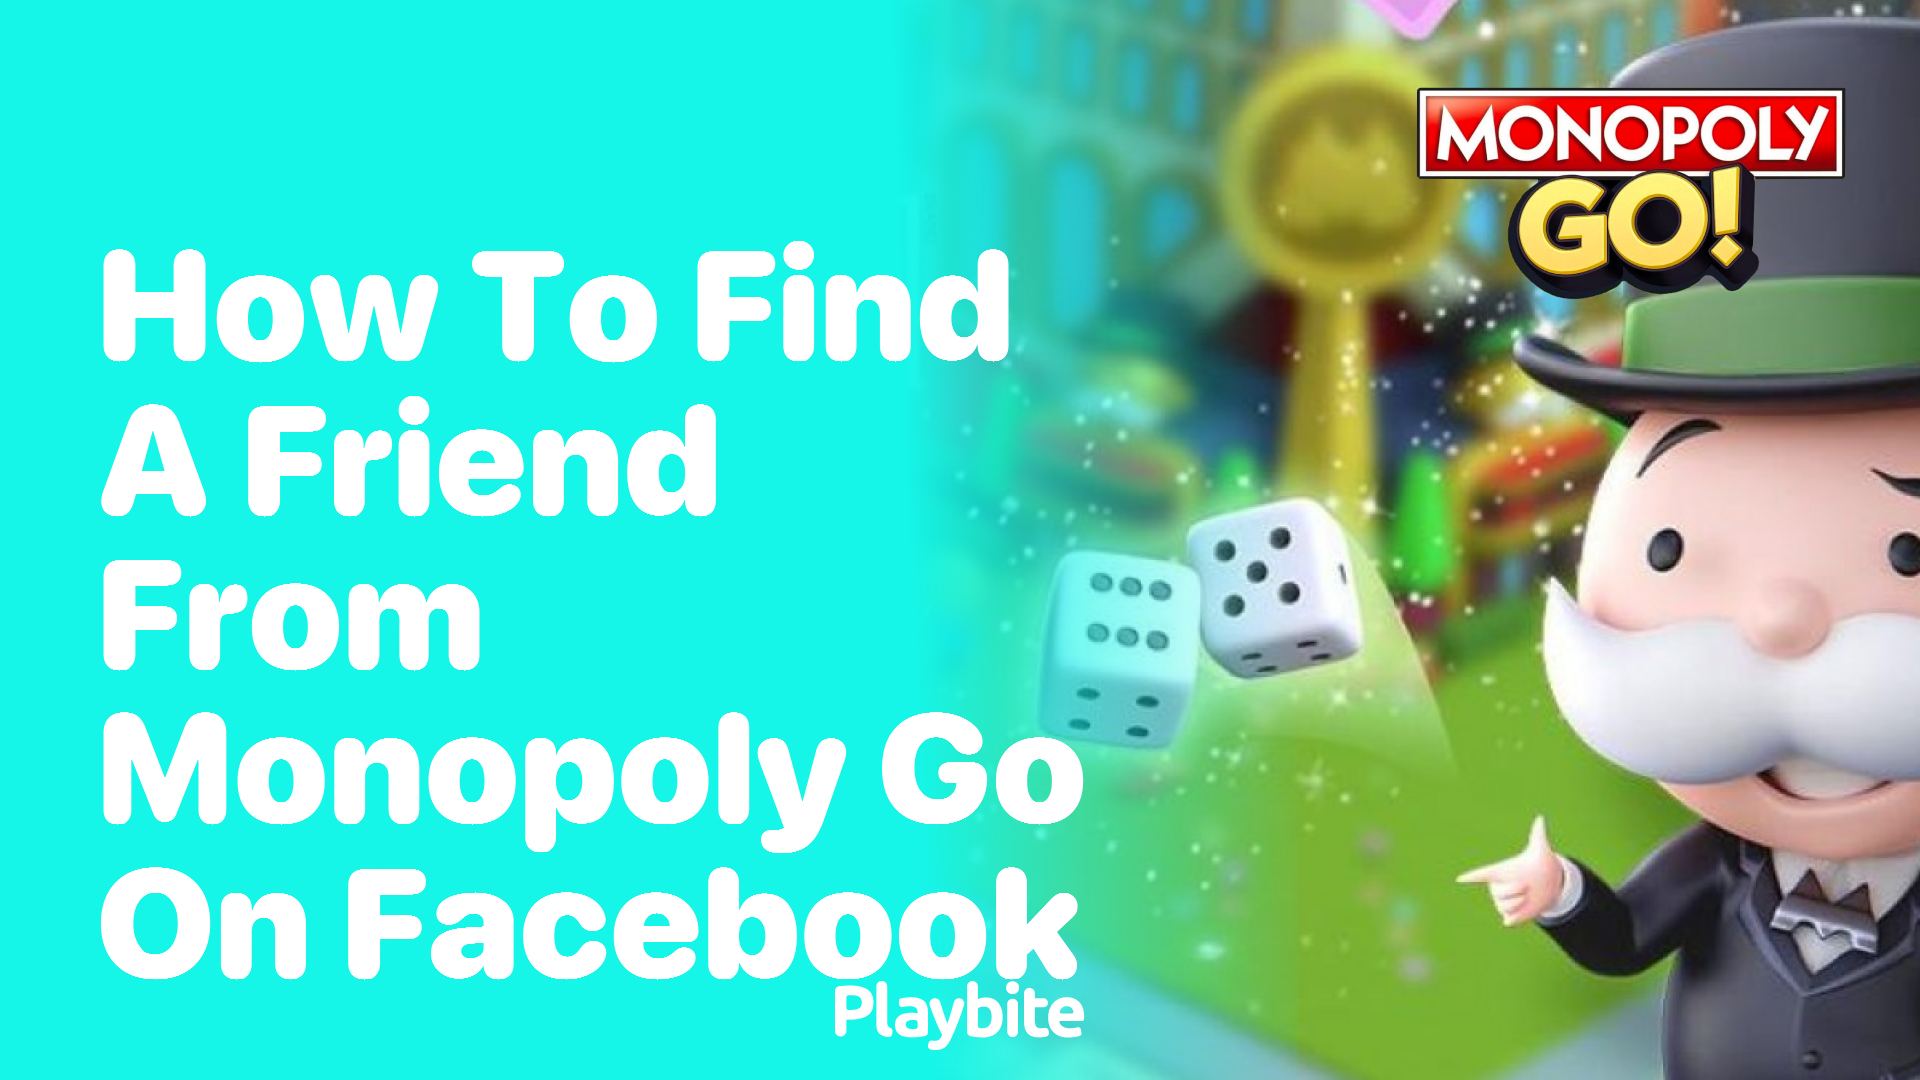 How to Find a Friend from Monopoly Go on Facebook